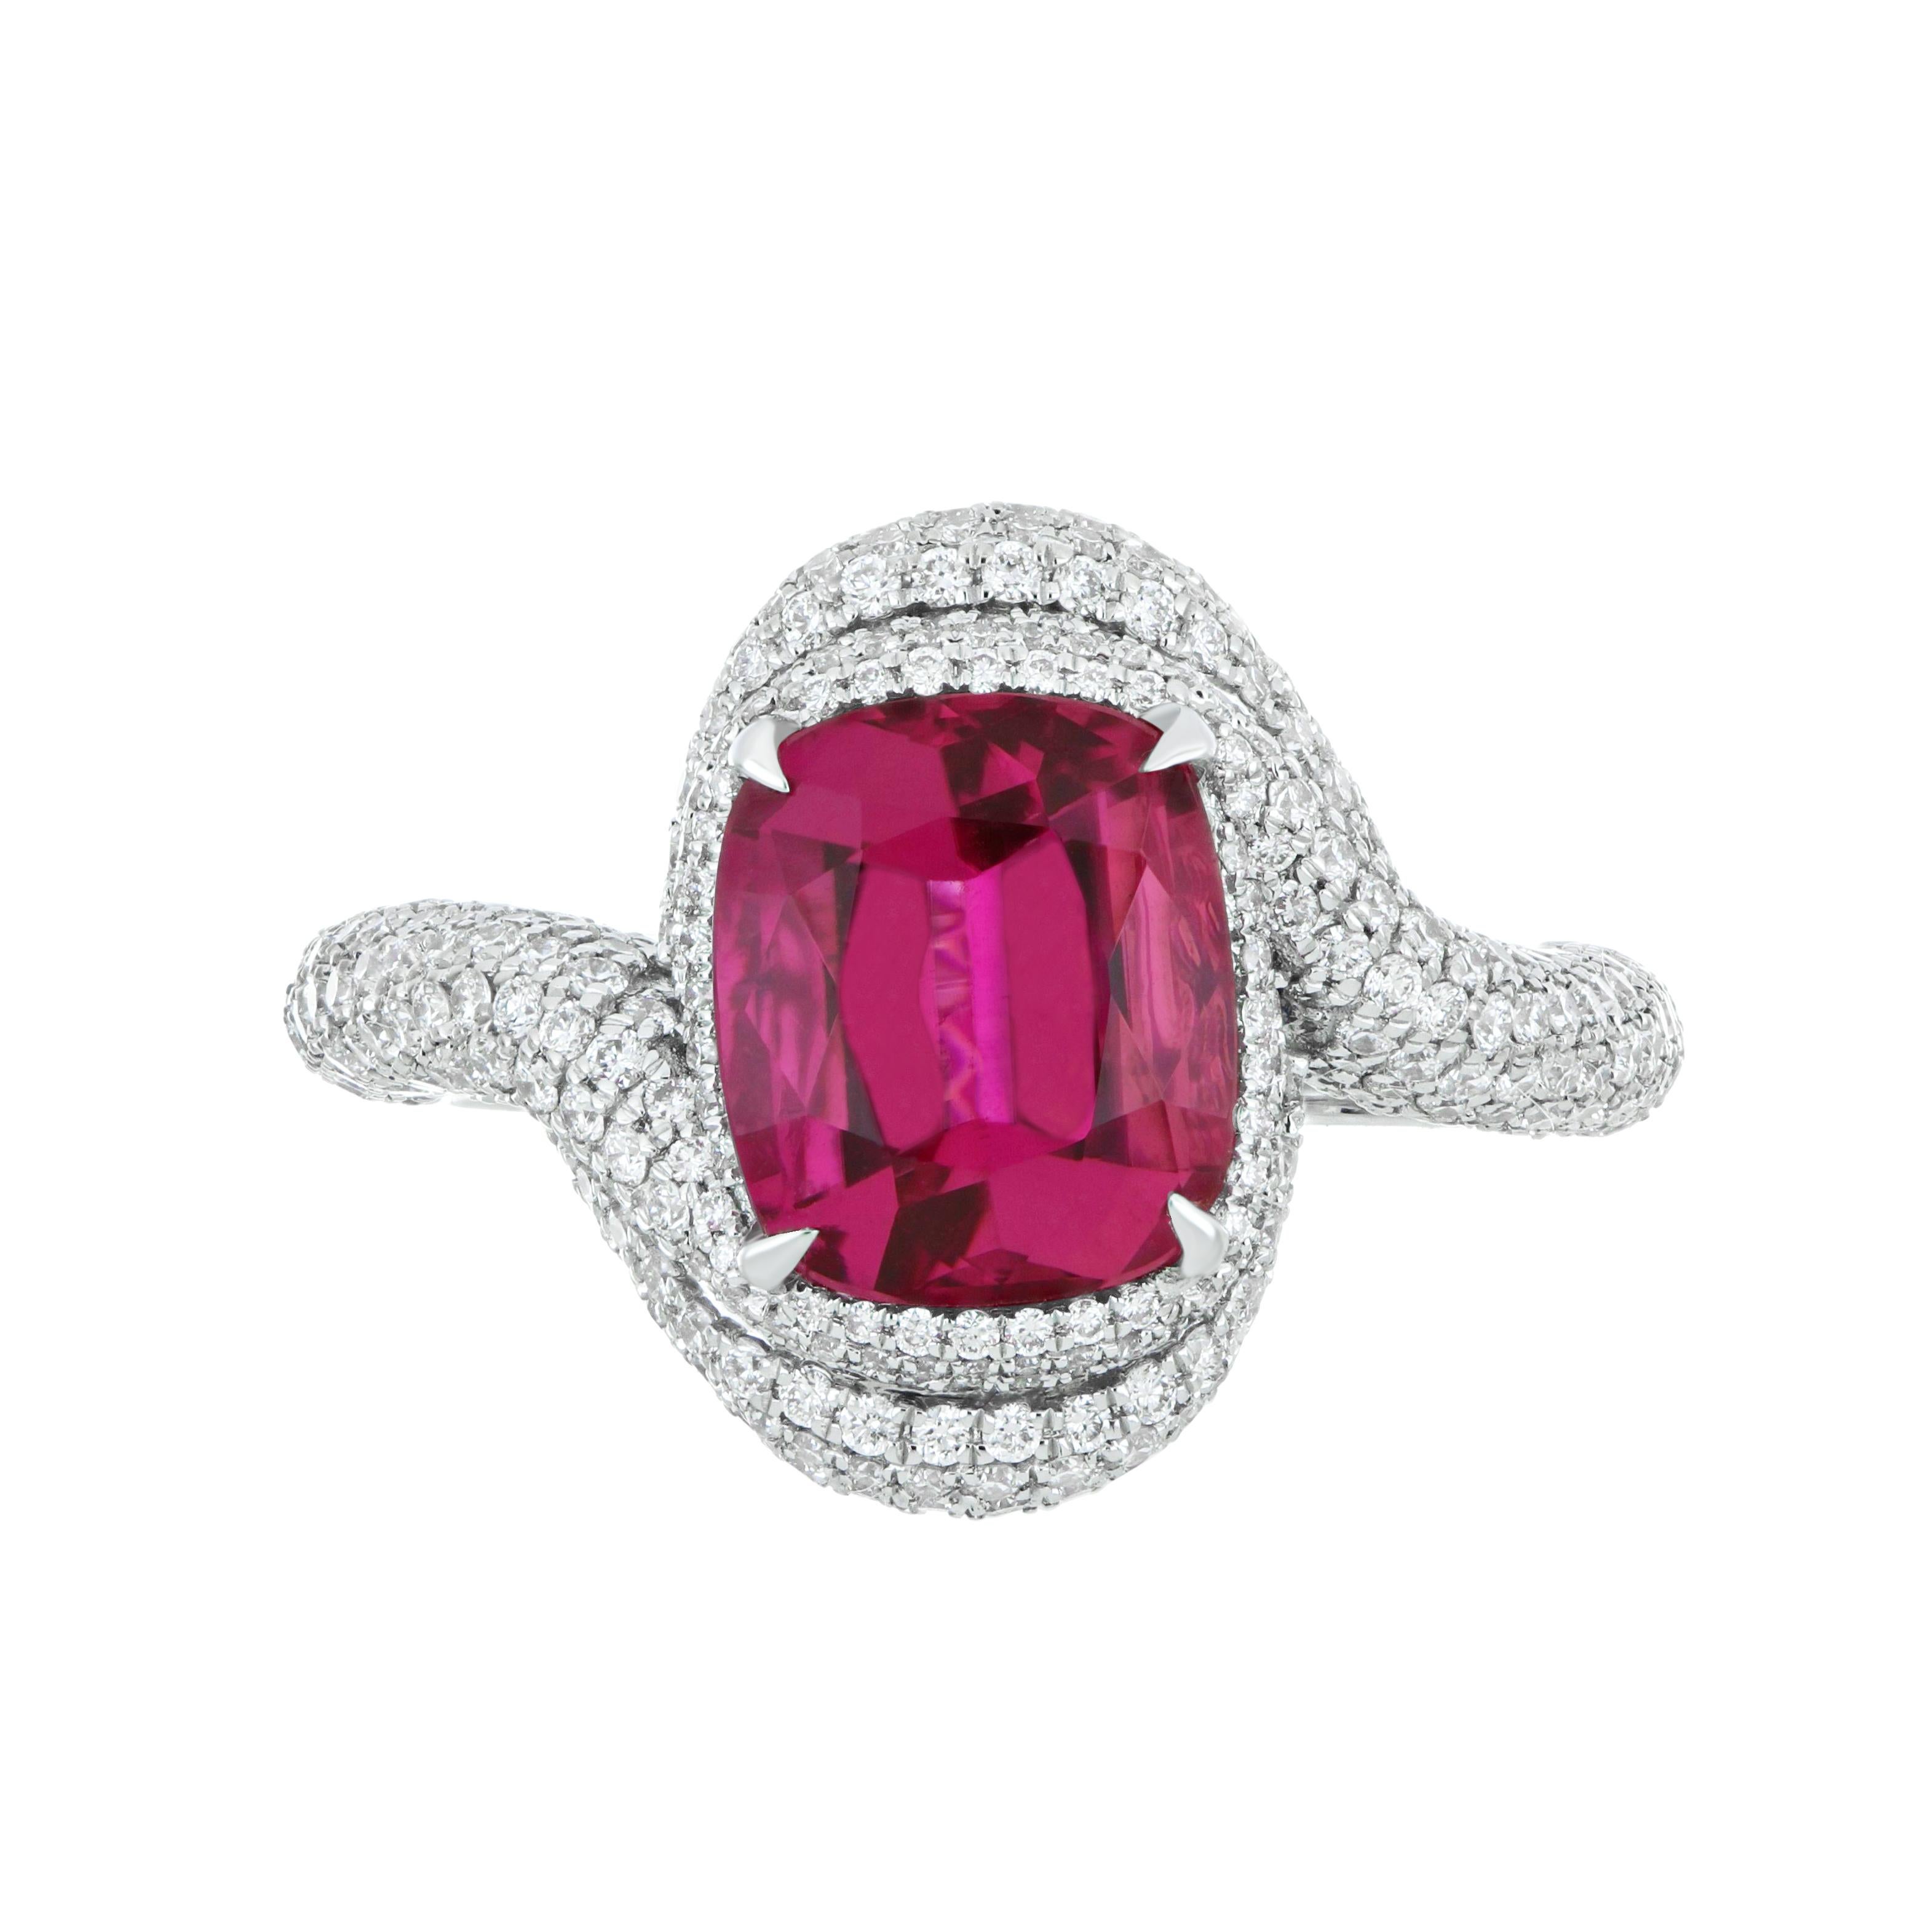 4.05 Carats Rubellite and Diamond Studded Ring in 18K White Gold Ring For Sale 1